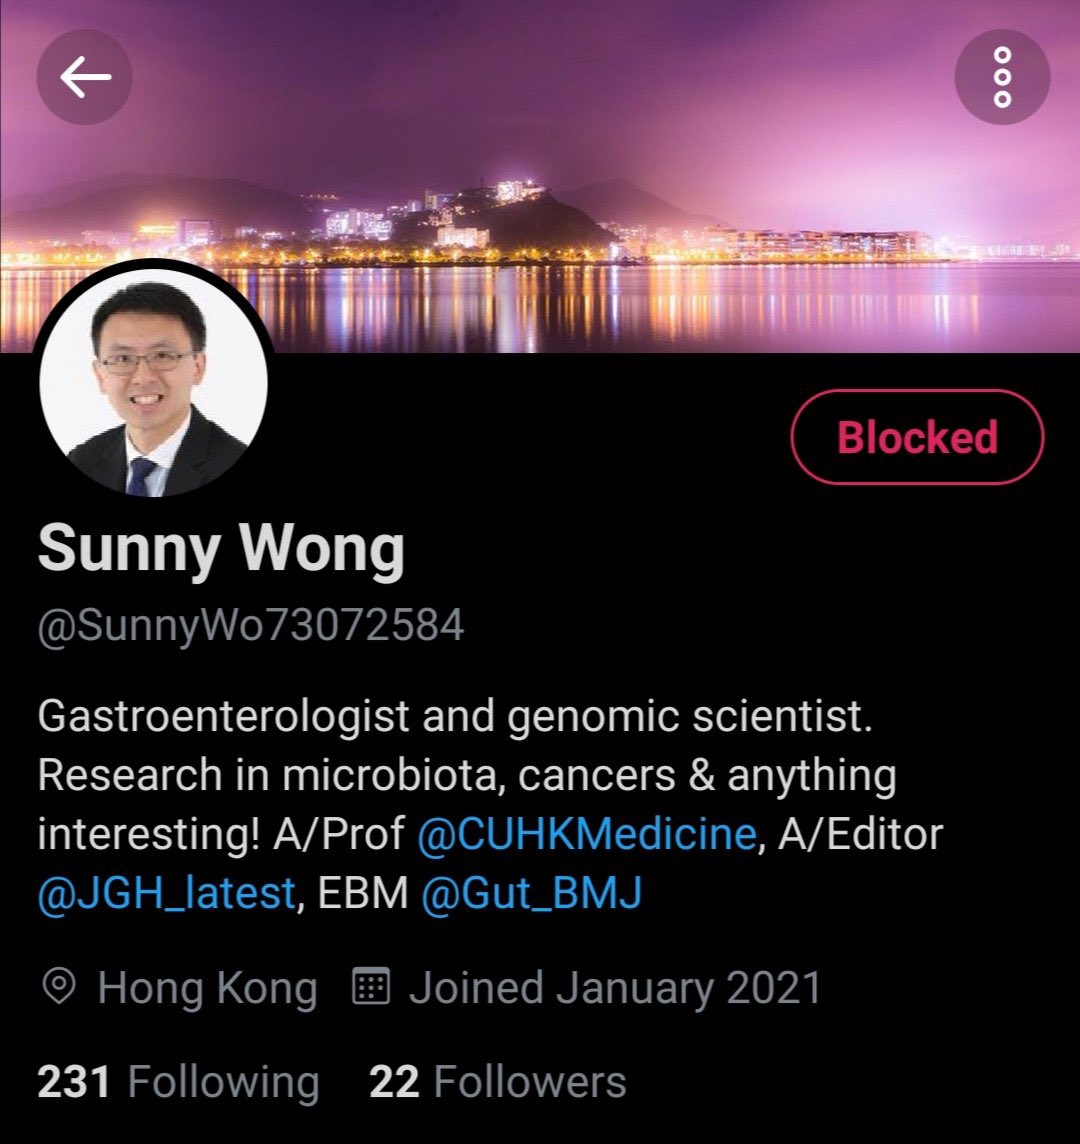 First I got followed on Twitter by a well known GI friend and I followed back. Didn’t realize I was already following him before and this was a fake account with the same profile details.